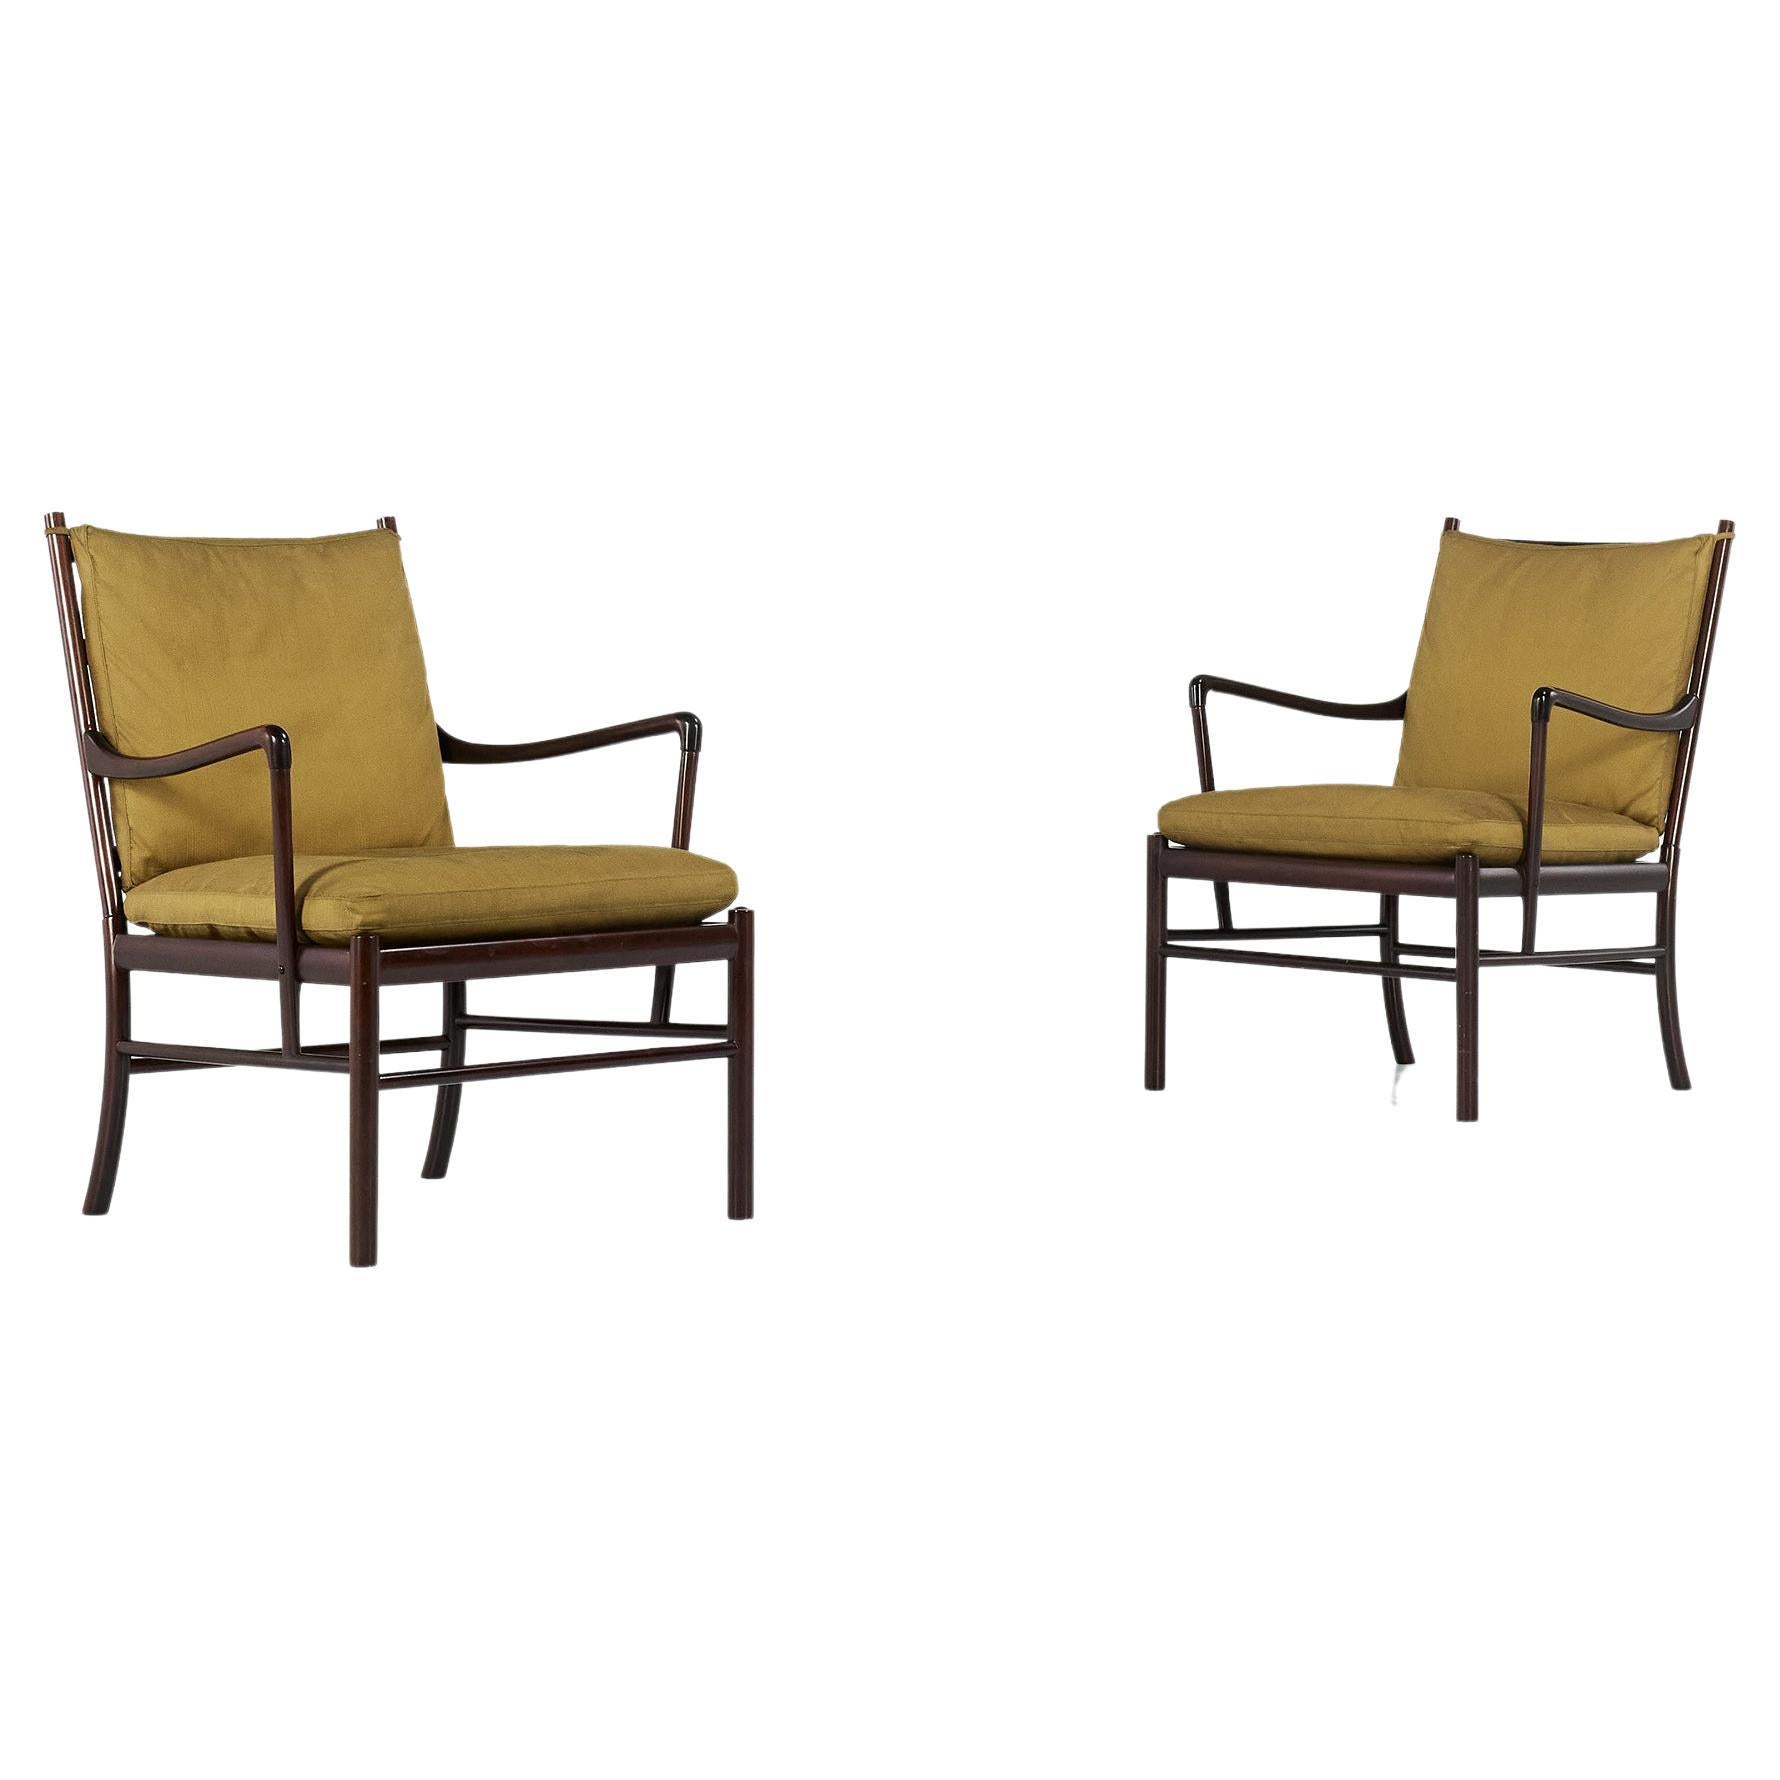 Pair of Mid-Century Armchairs Model PJ149 by Ole Wanscher for Poul Jeppesen